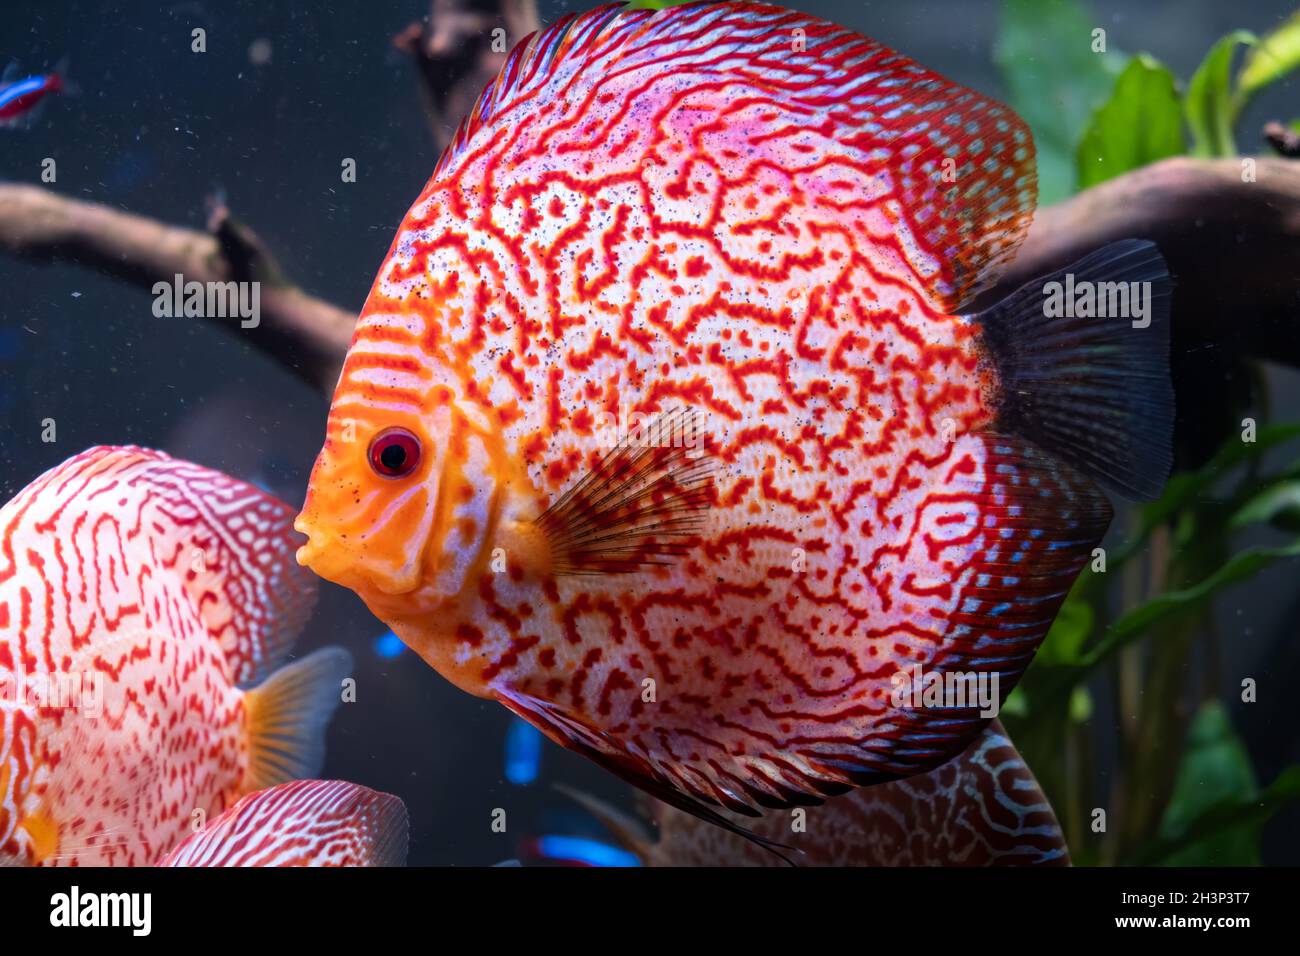 Red tropical Symphysodon discus fish in fishtank. Stock Photo